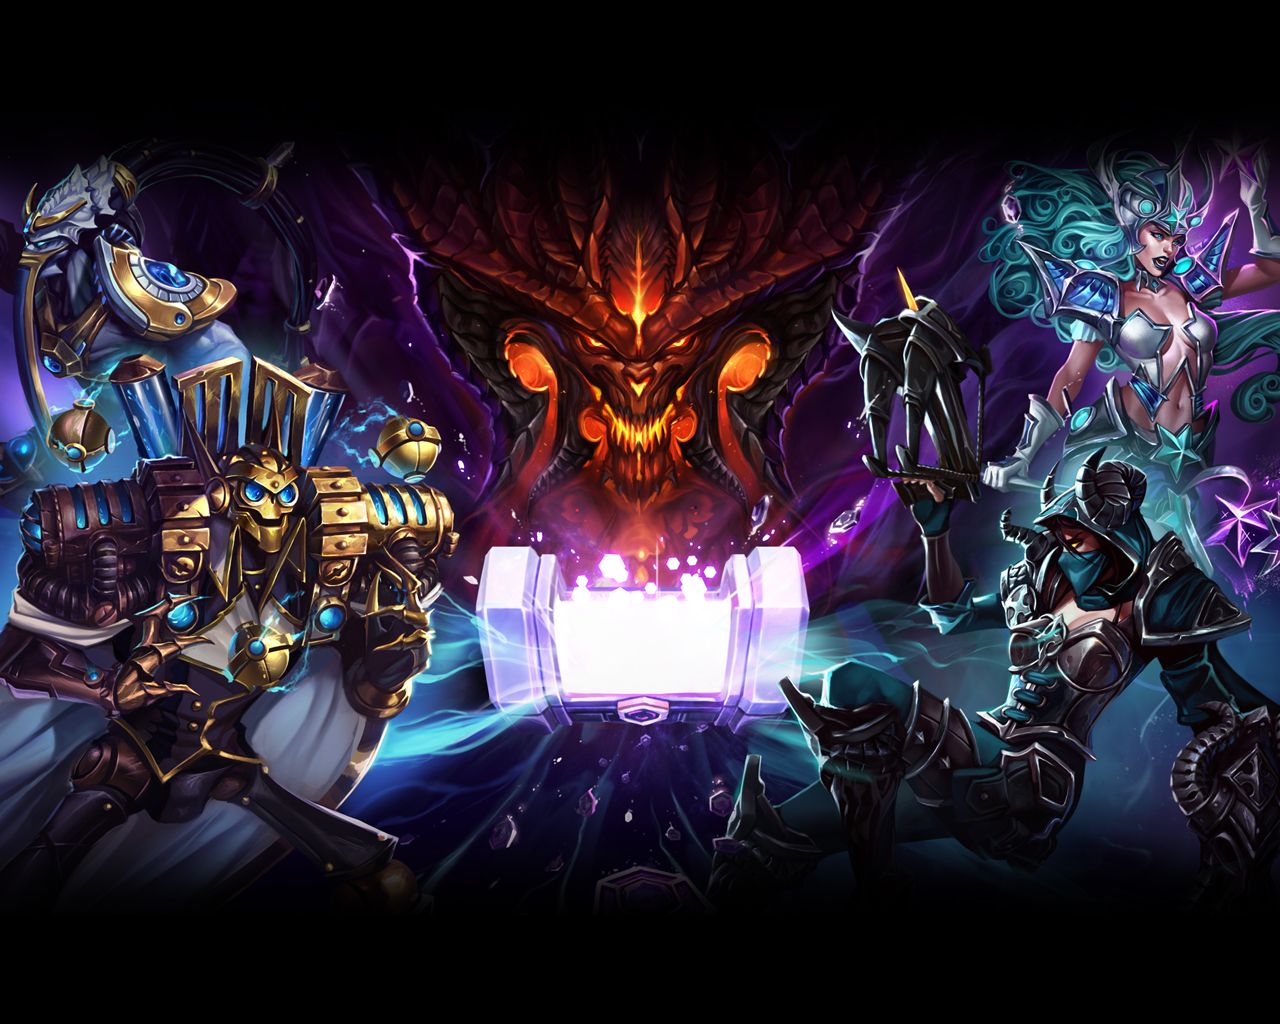 1280x1024 Heroes Of The Storm Wallpaper Pc In5aer